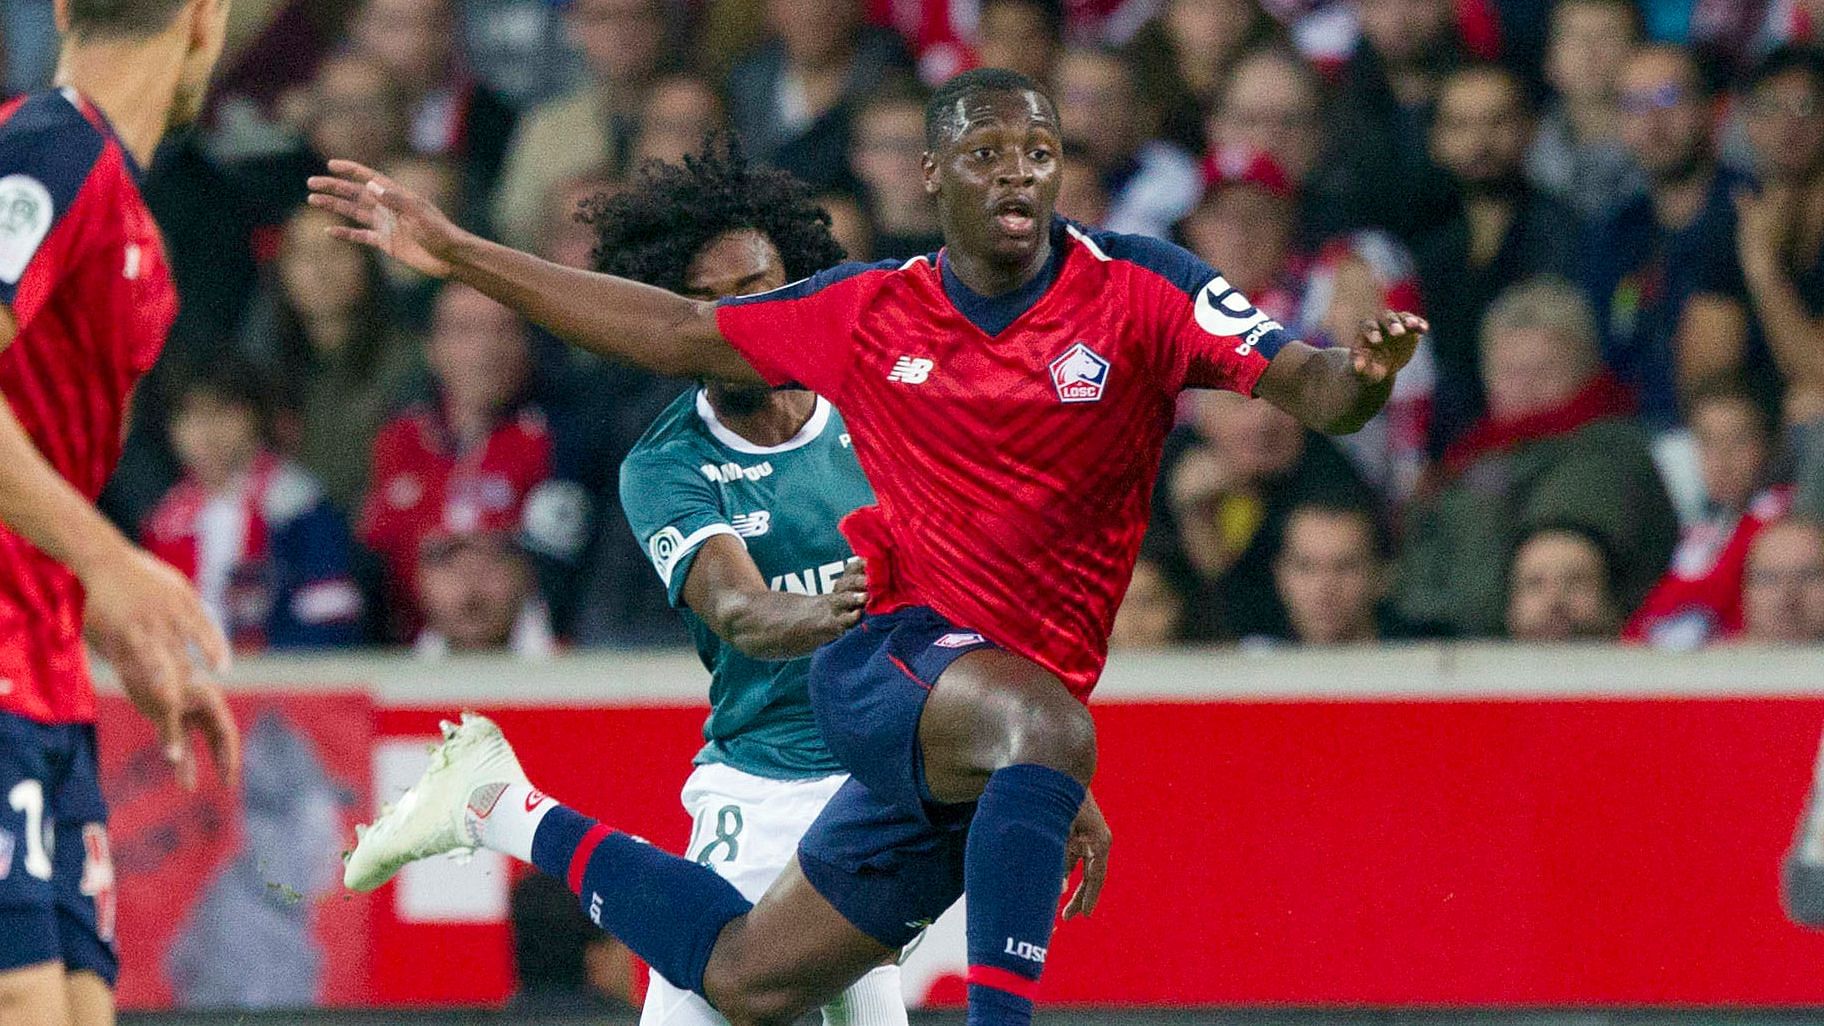 Arsenal have signed winger Nicolas Pepe from Lille in a bid to return to the Champions League.